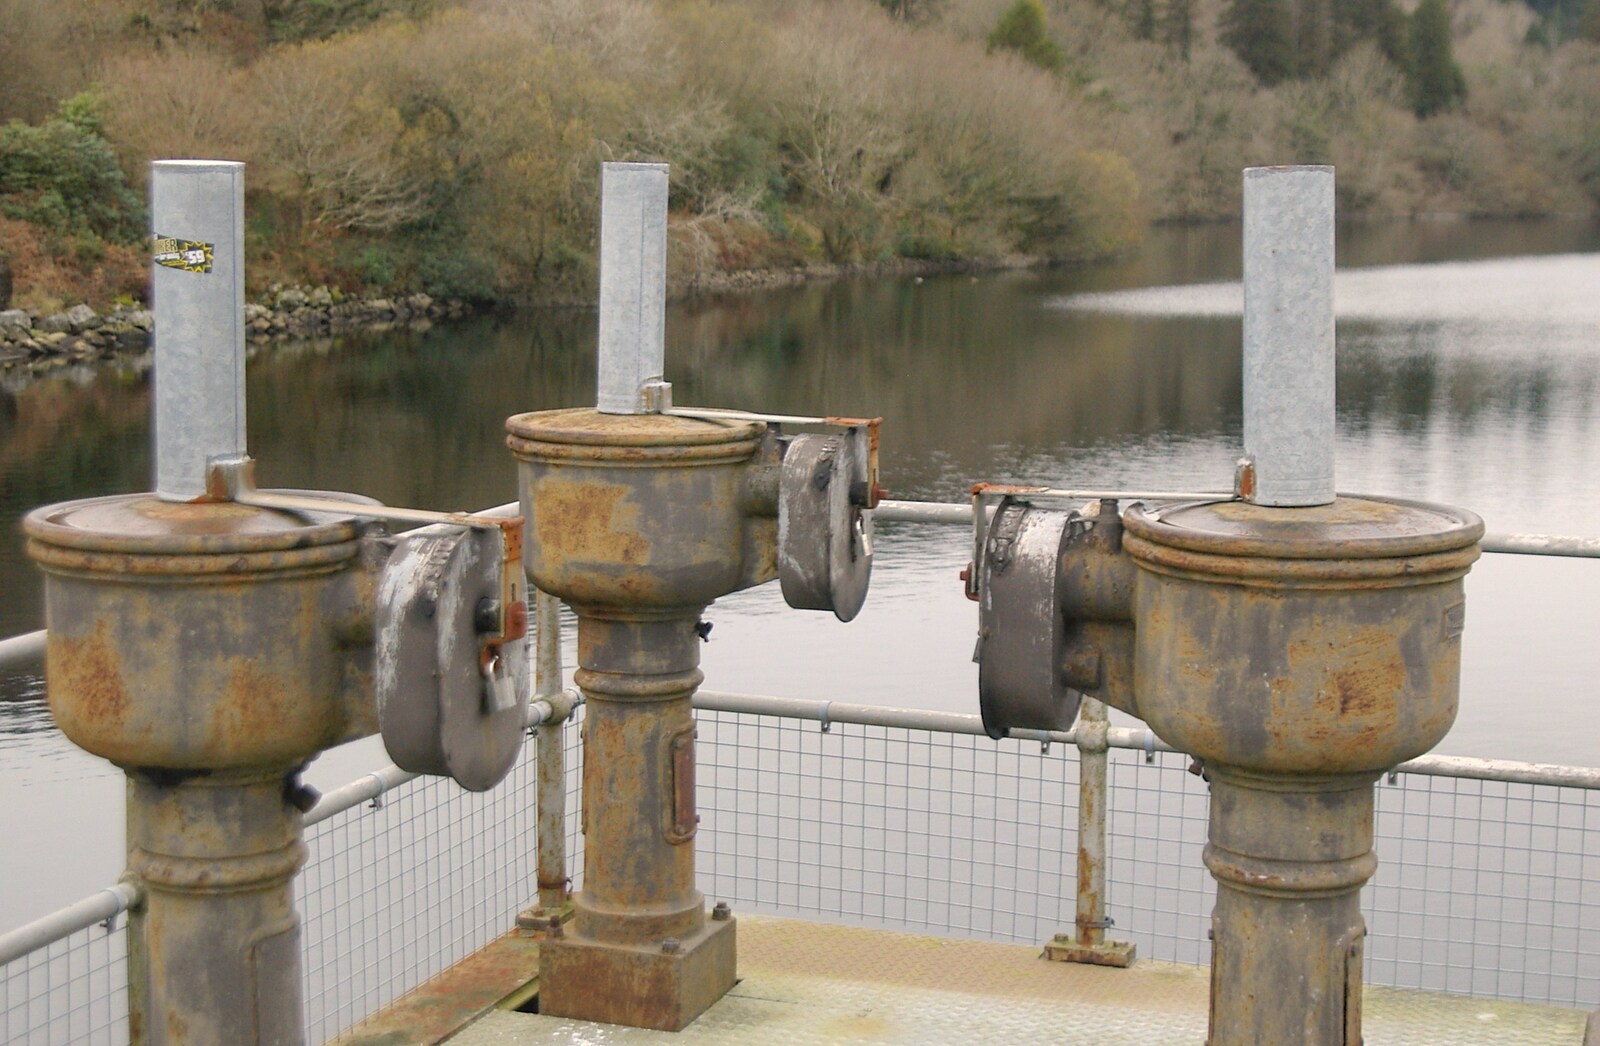 Some water control valves from A Wander Around Hoo Meavy and Burrator, Dartmoor, Devon - 18th December 2005